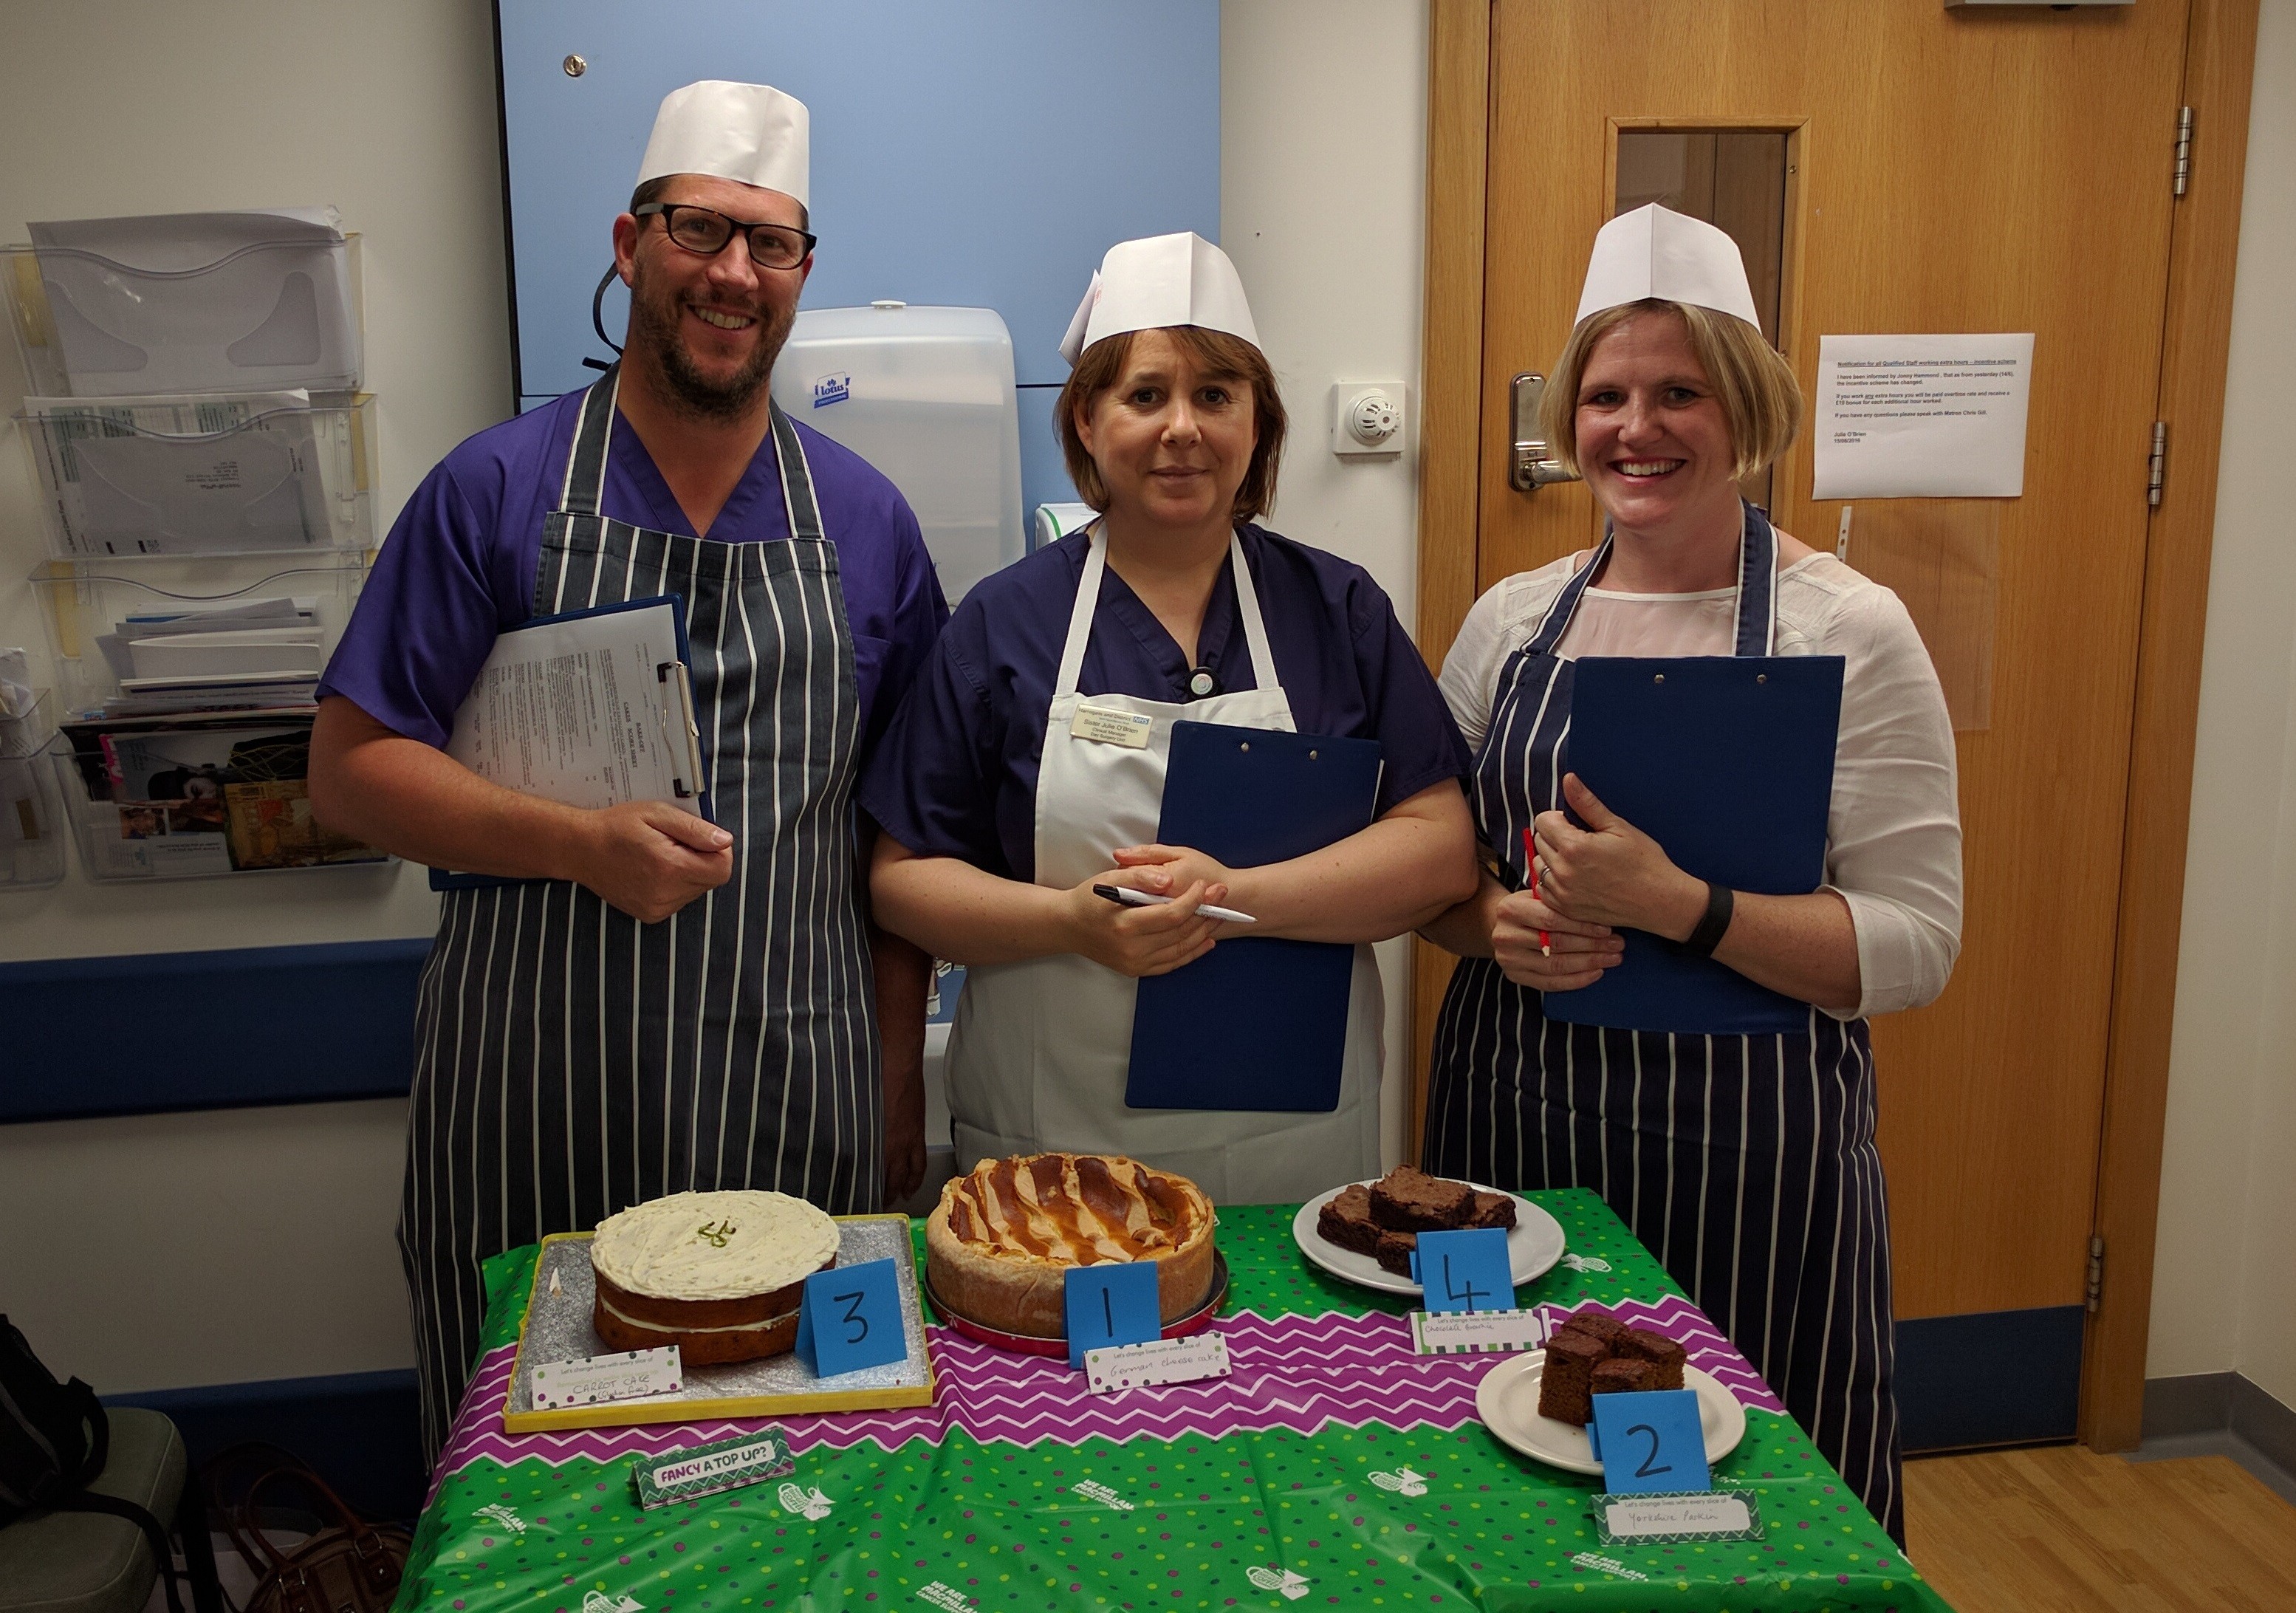 Sampling the delights - Staff play the part of Bake Off judges in best cake competition.